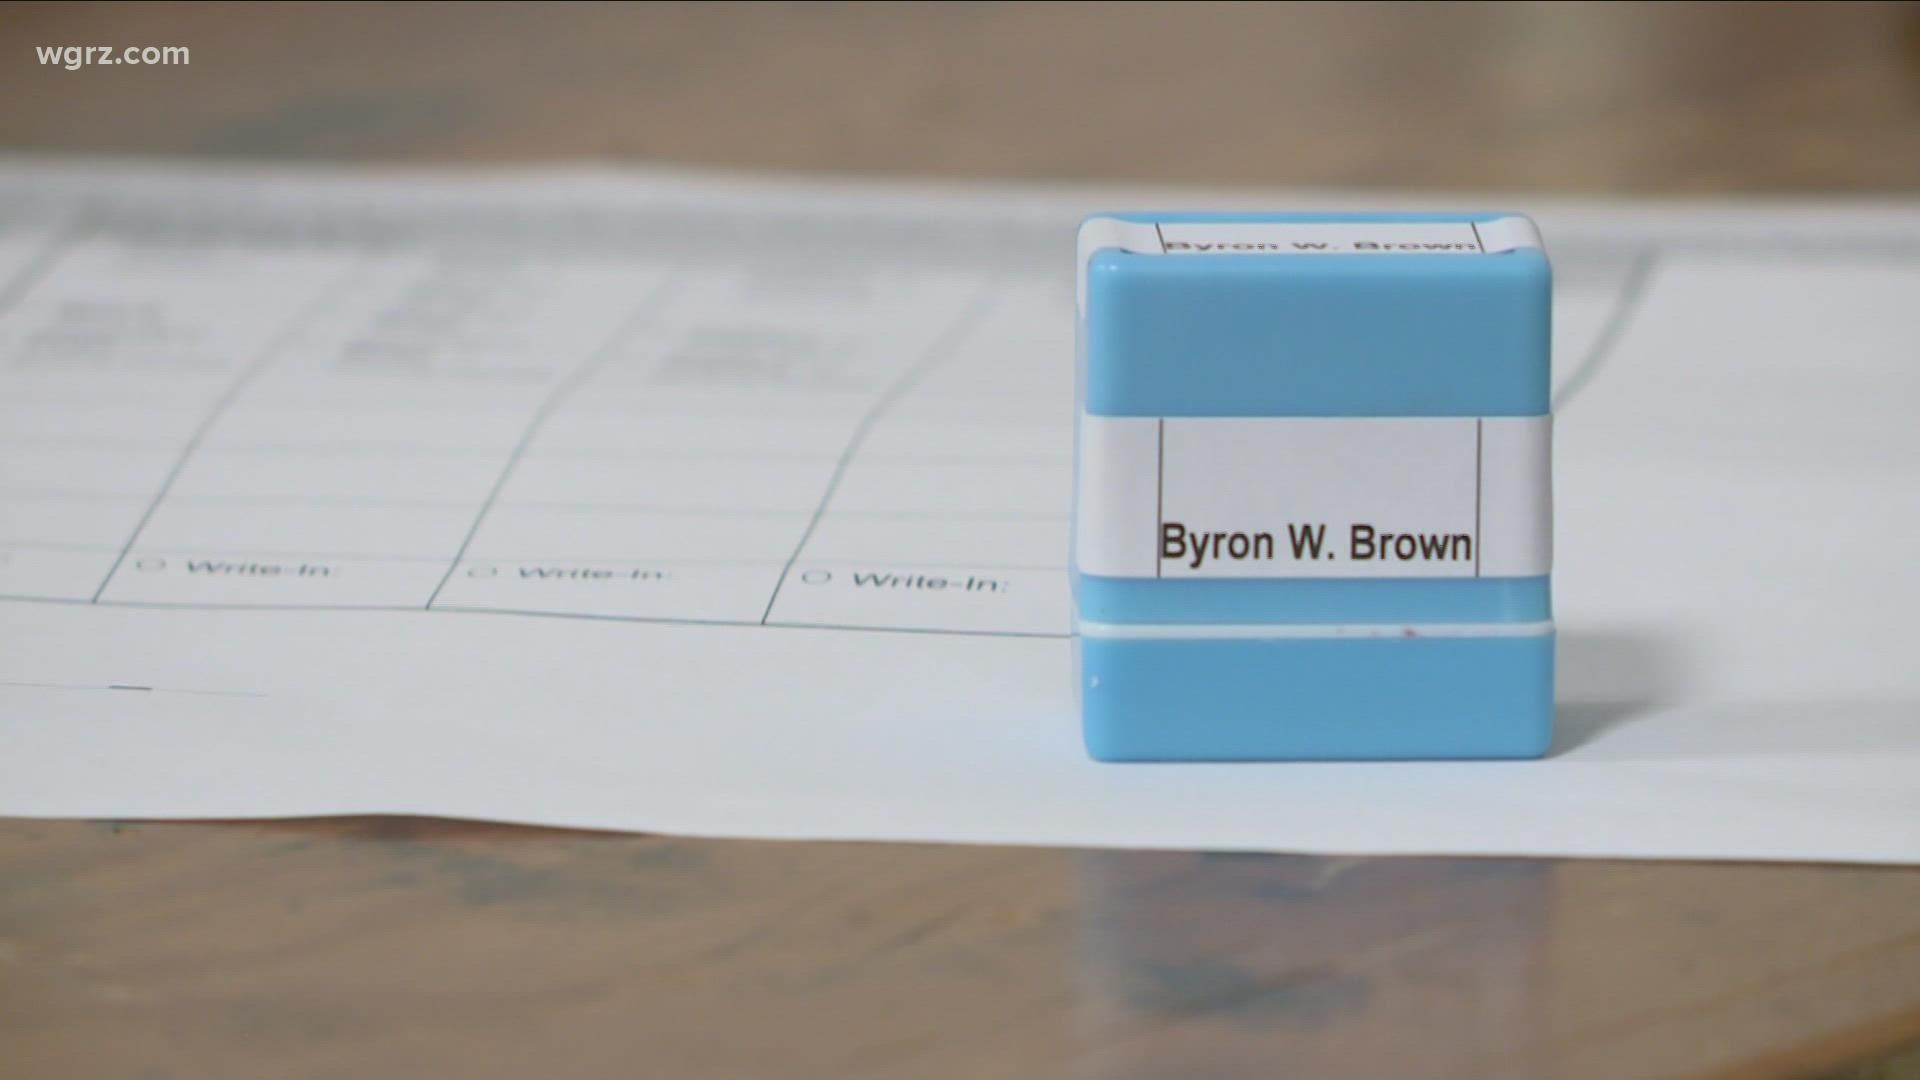 It is alleged that on election day, November 2nd of 2021, the defendant used a stamp to place the name of Byron Brown on numerous ballots.